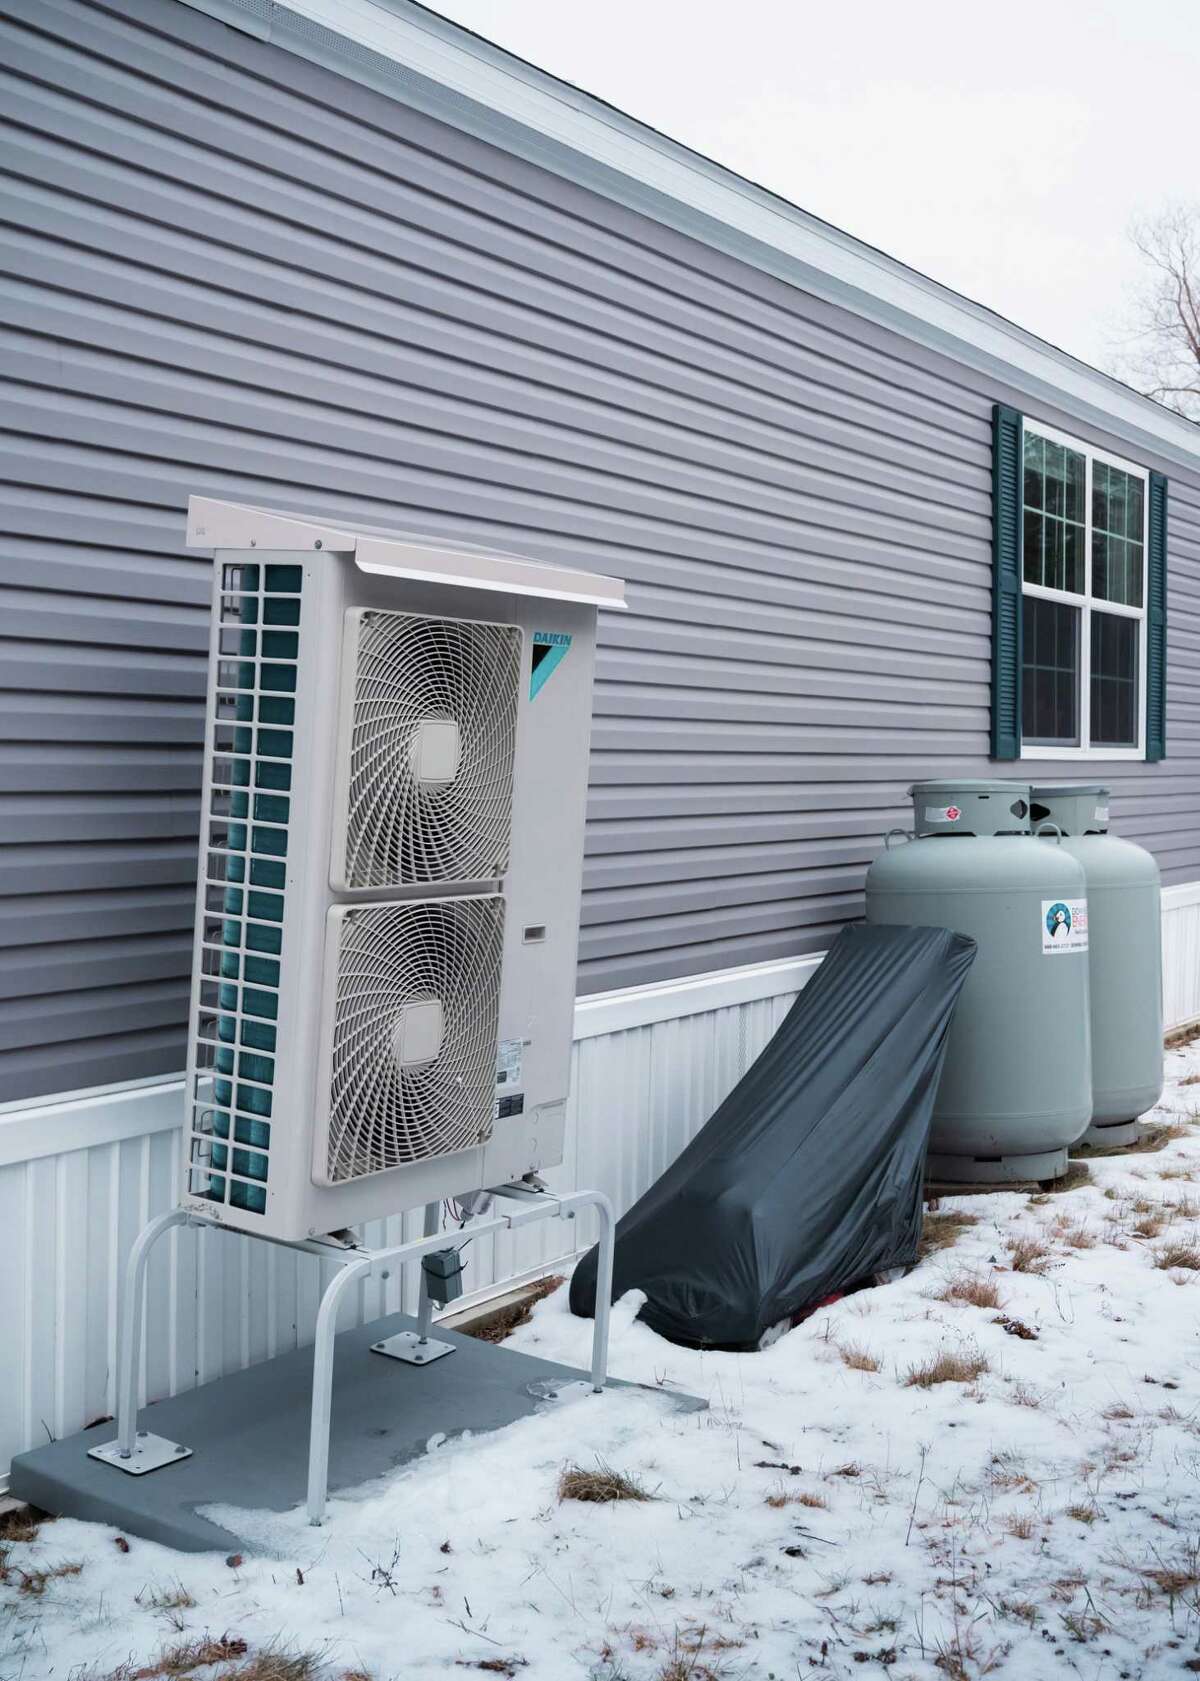 A new heat pump and propane tanks sit on the outside of Casagranda's home. The devices are growing in popularity in New England, in part because of improved energy efficiency and new tax incentives.